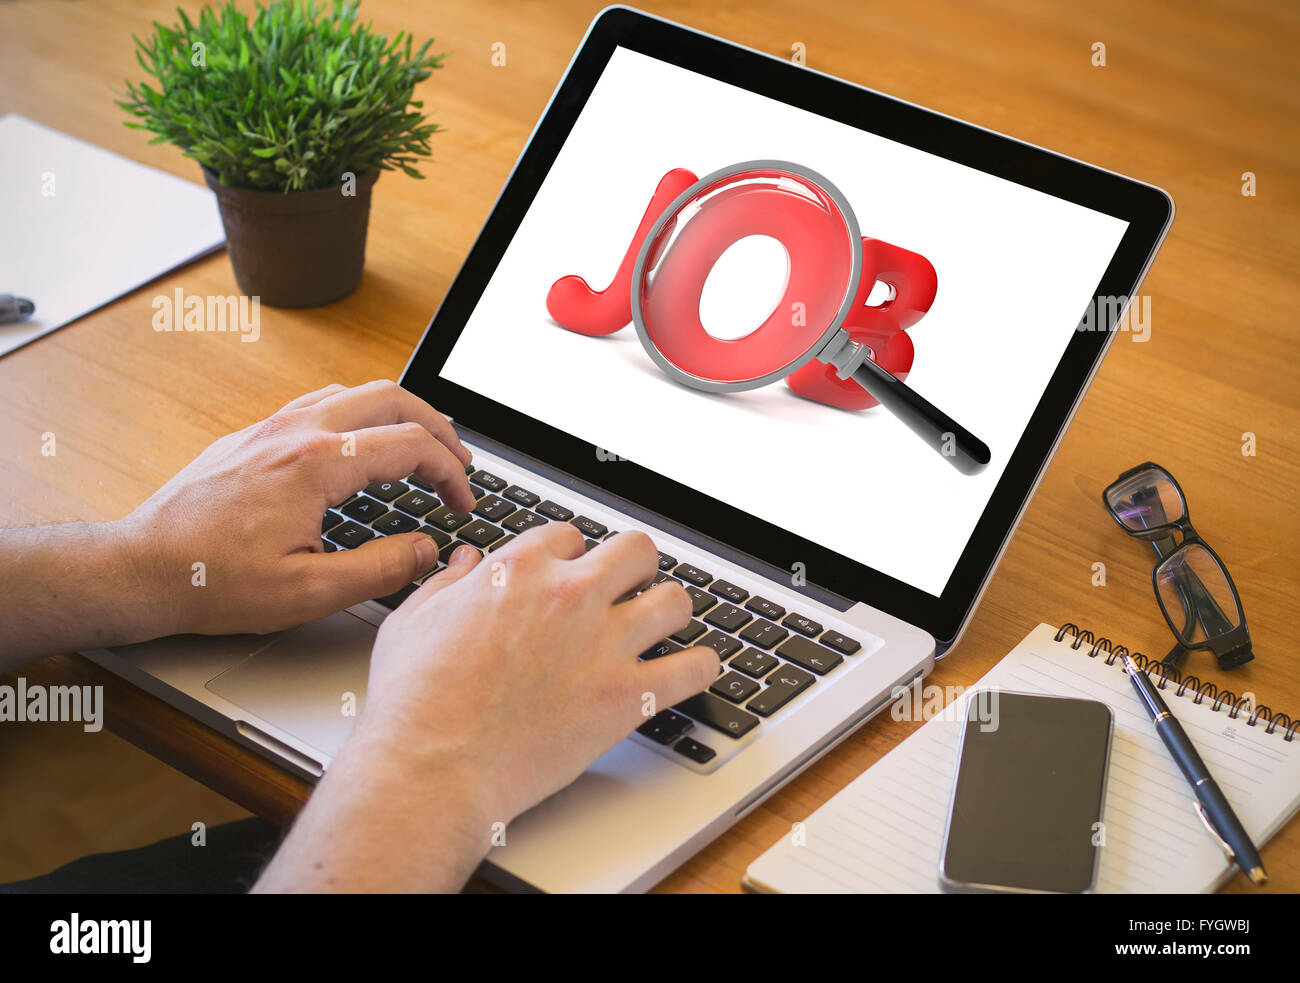 job search concept. Close-up top view of man working on laptop. all screen graphics are made up. Stock Photo